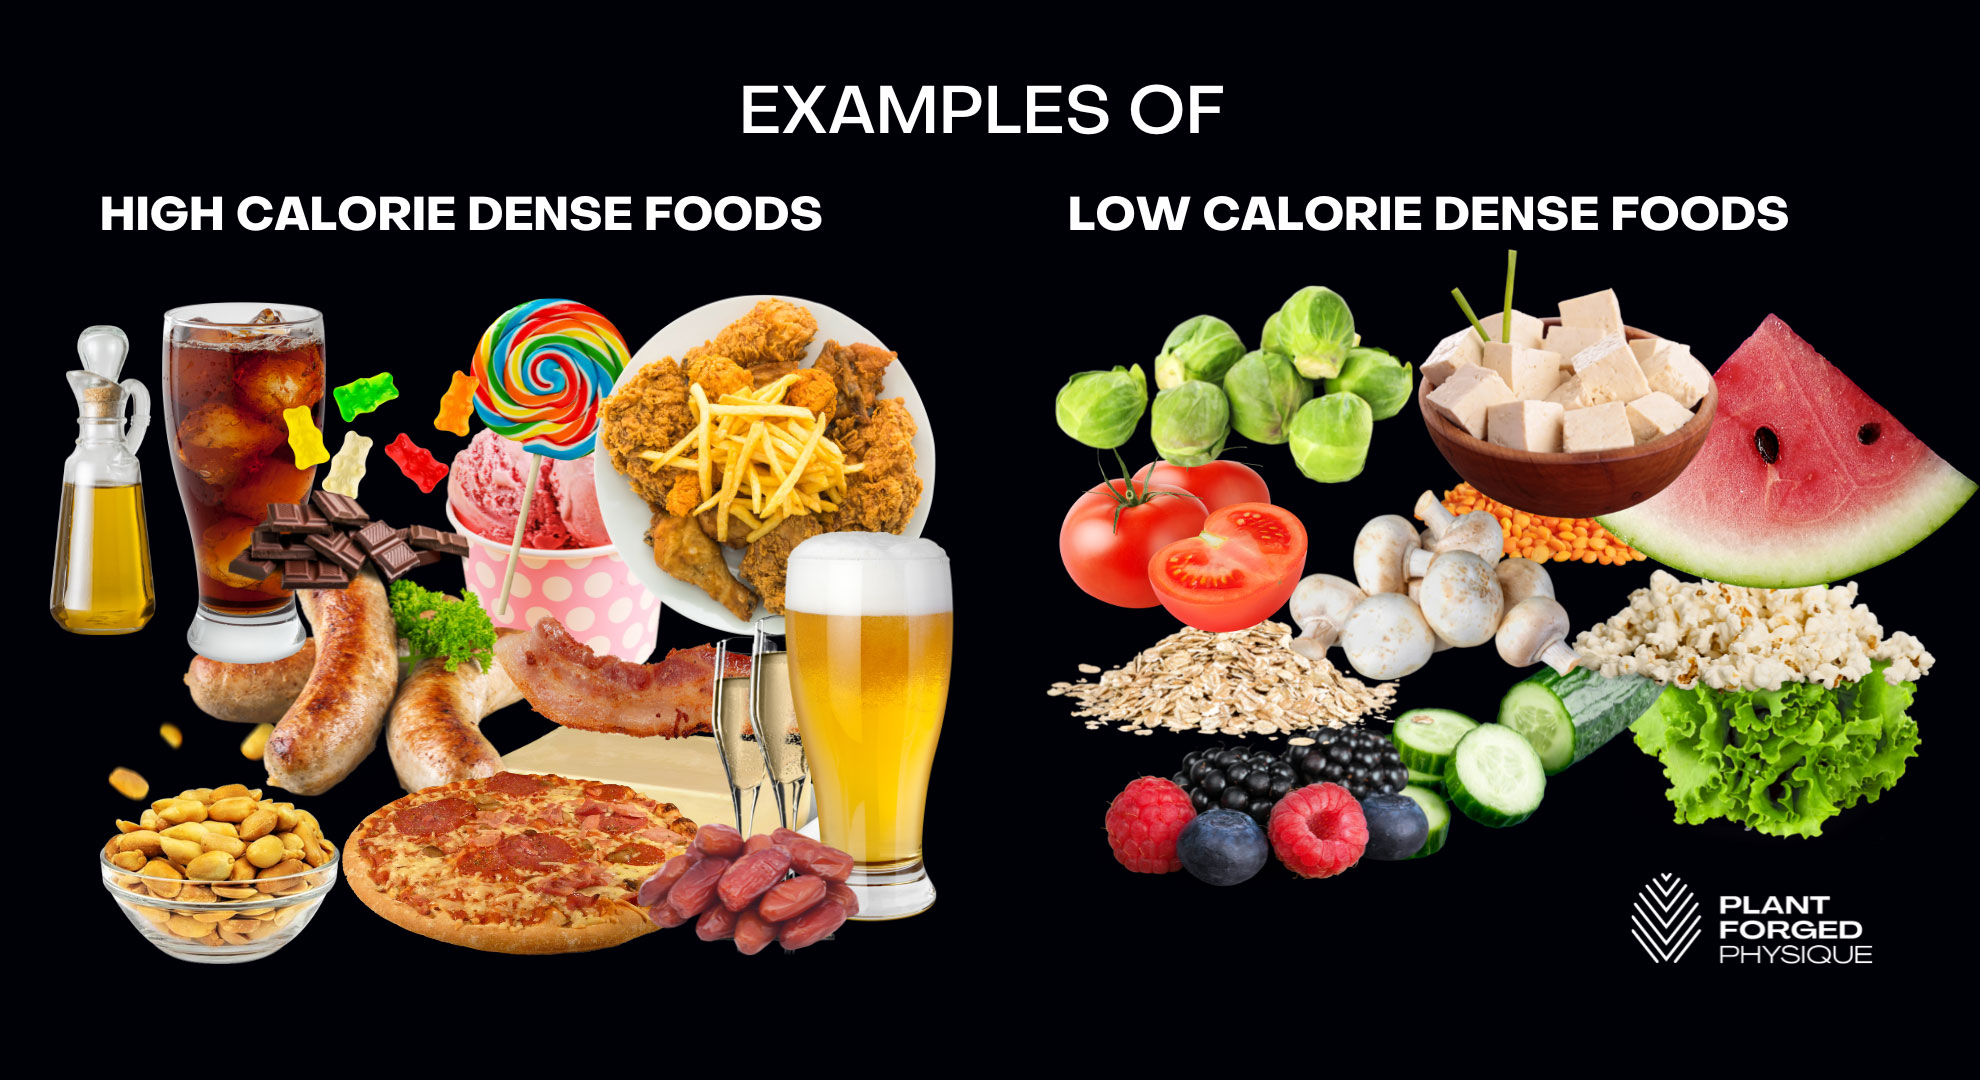 Examples of high calorie dense foods and low calorie dense foods